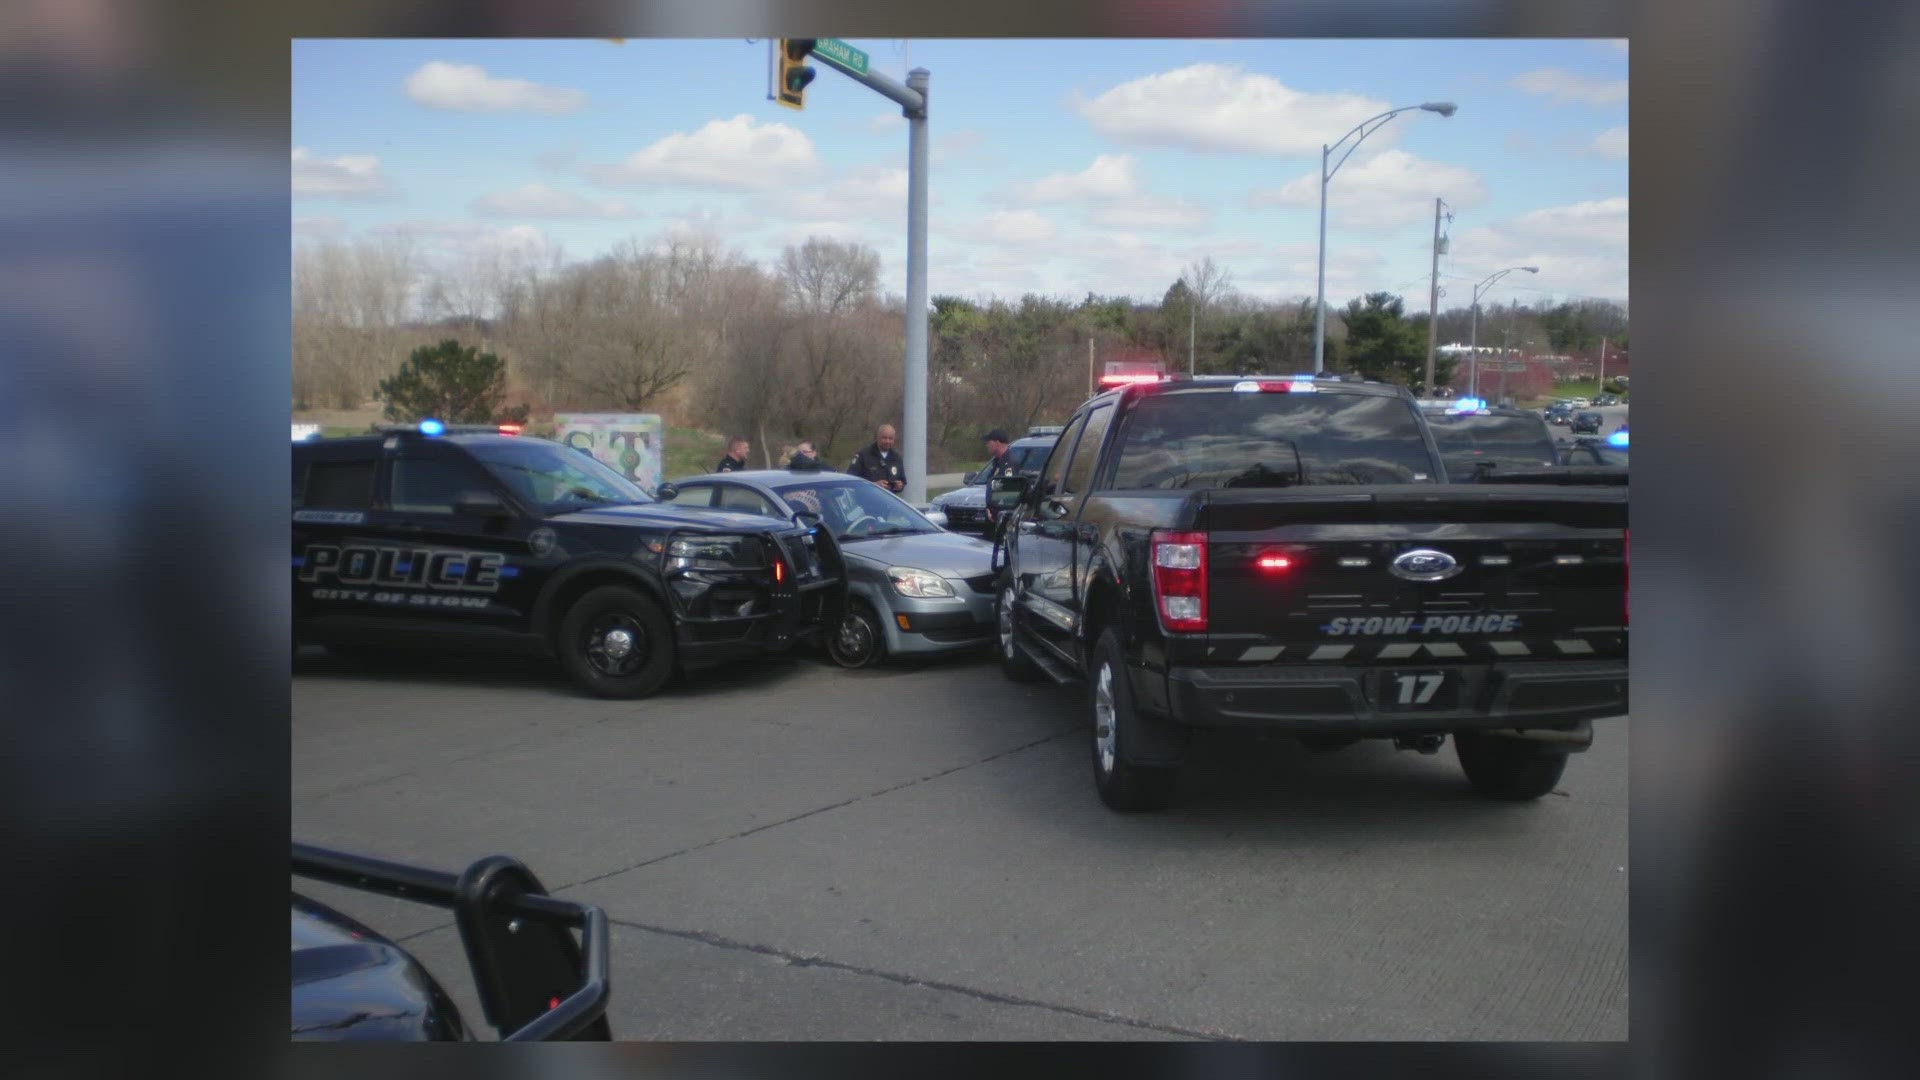 Stow police officials say a 20-year-old woman is in custody after allegedly leading officers on a chase through several communities and striking a cruiser.